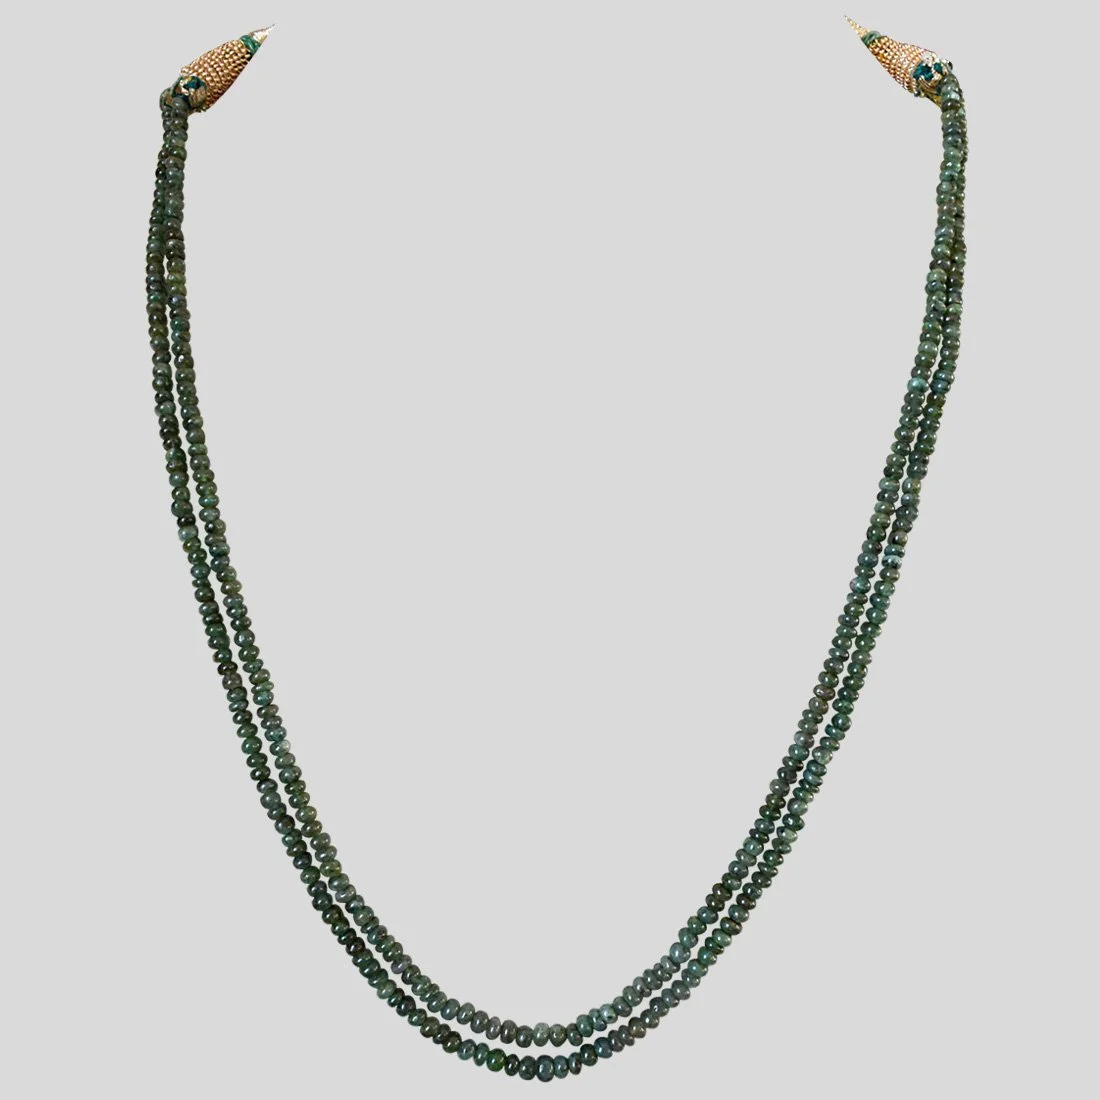 Two Line 93cts REAL Natural Green Emerald Beads Necklace for Women (93cts EMR Neck)